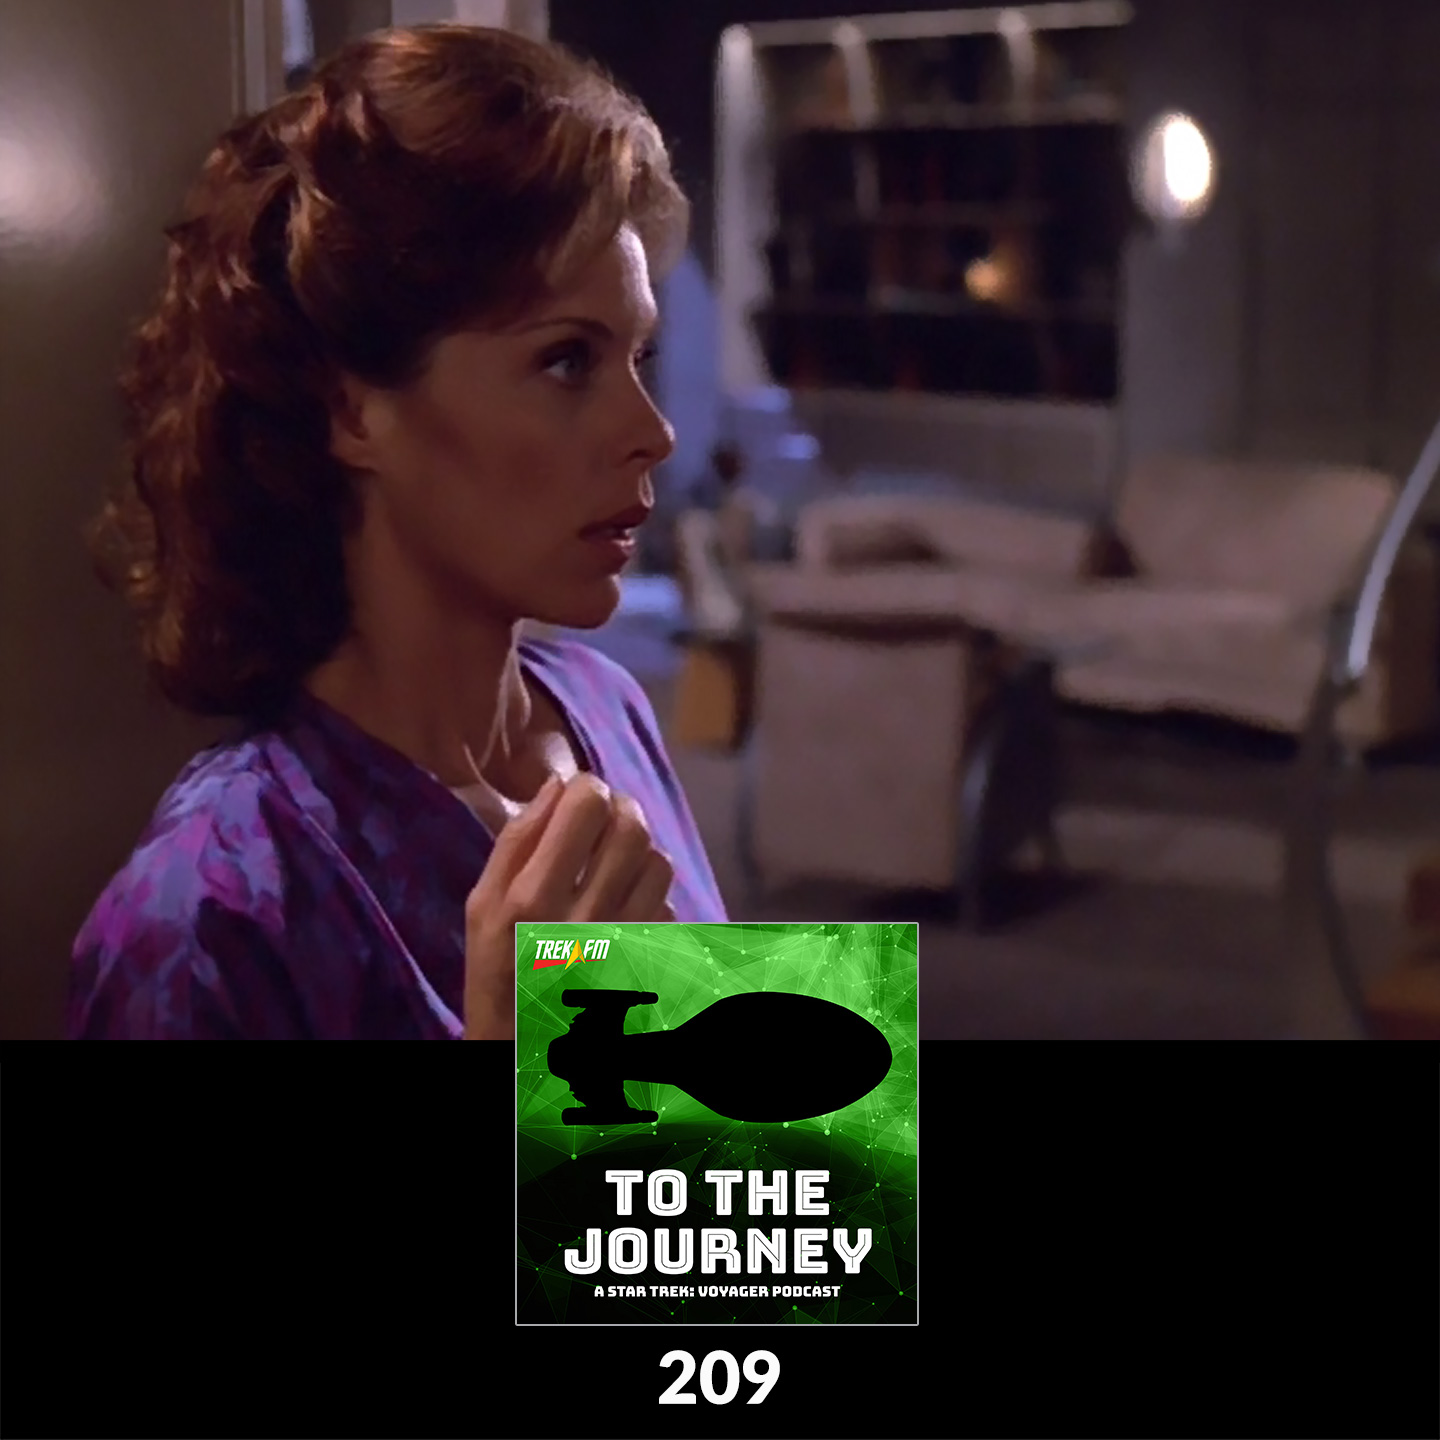 To The Journey 209: You Know When You've Been Chakotay'd - "In the Flesh" Commentary.